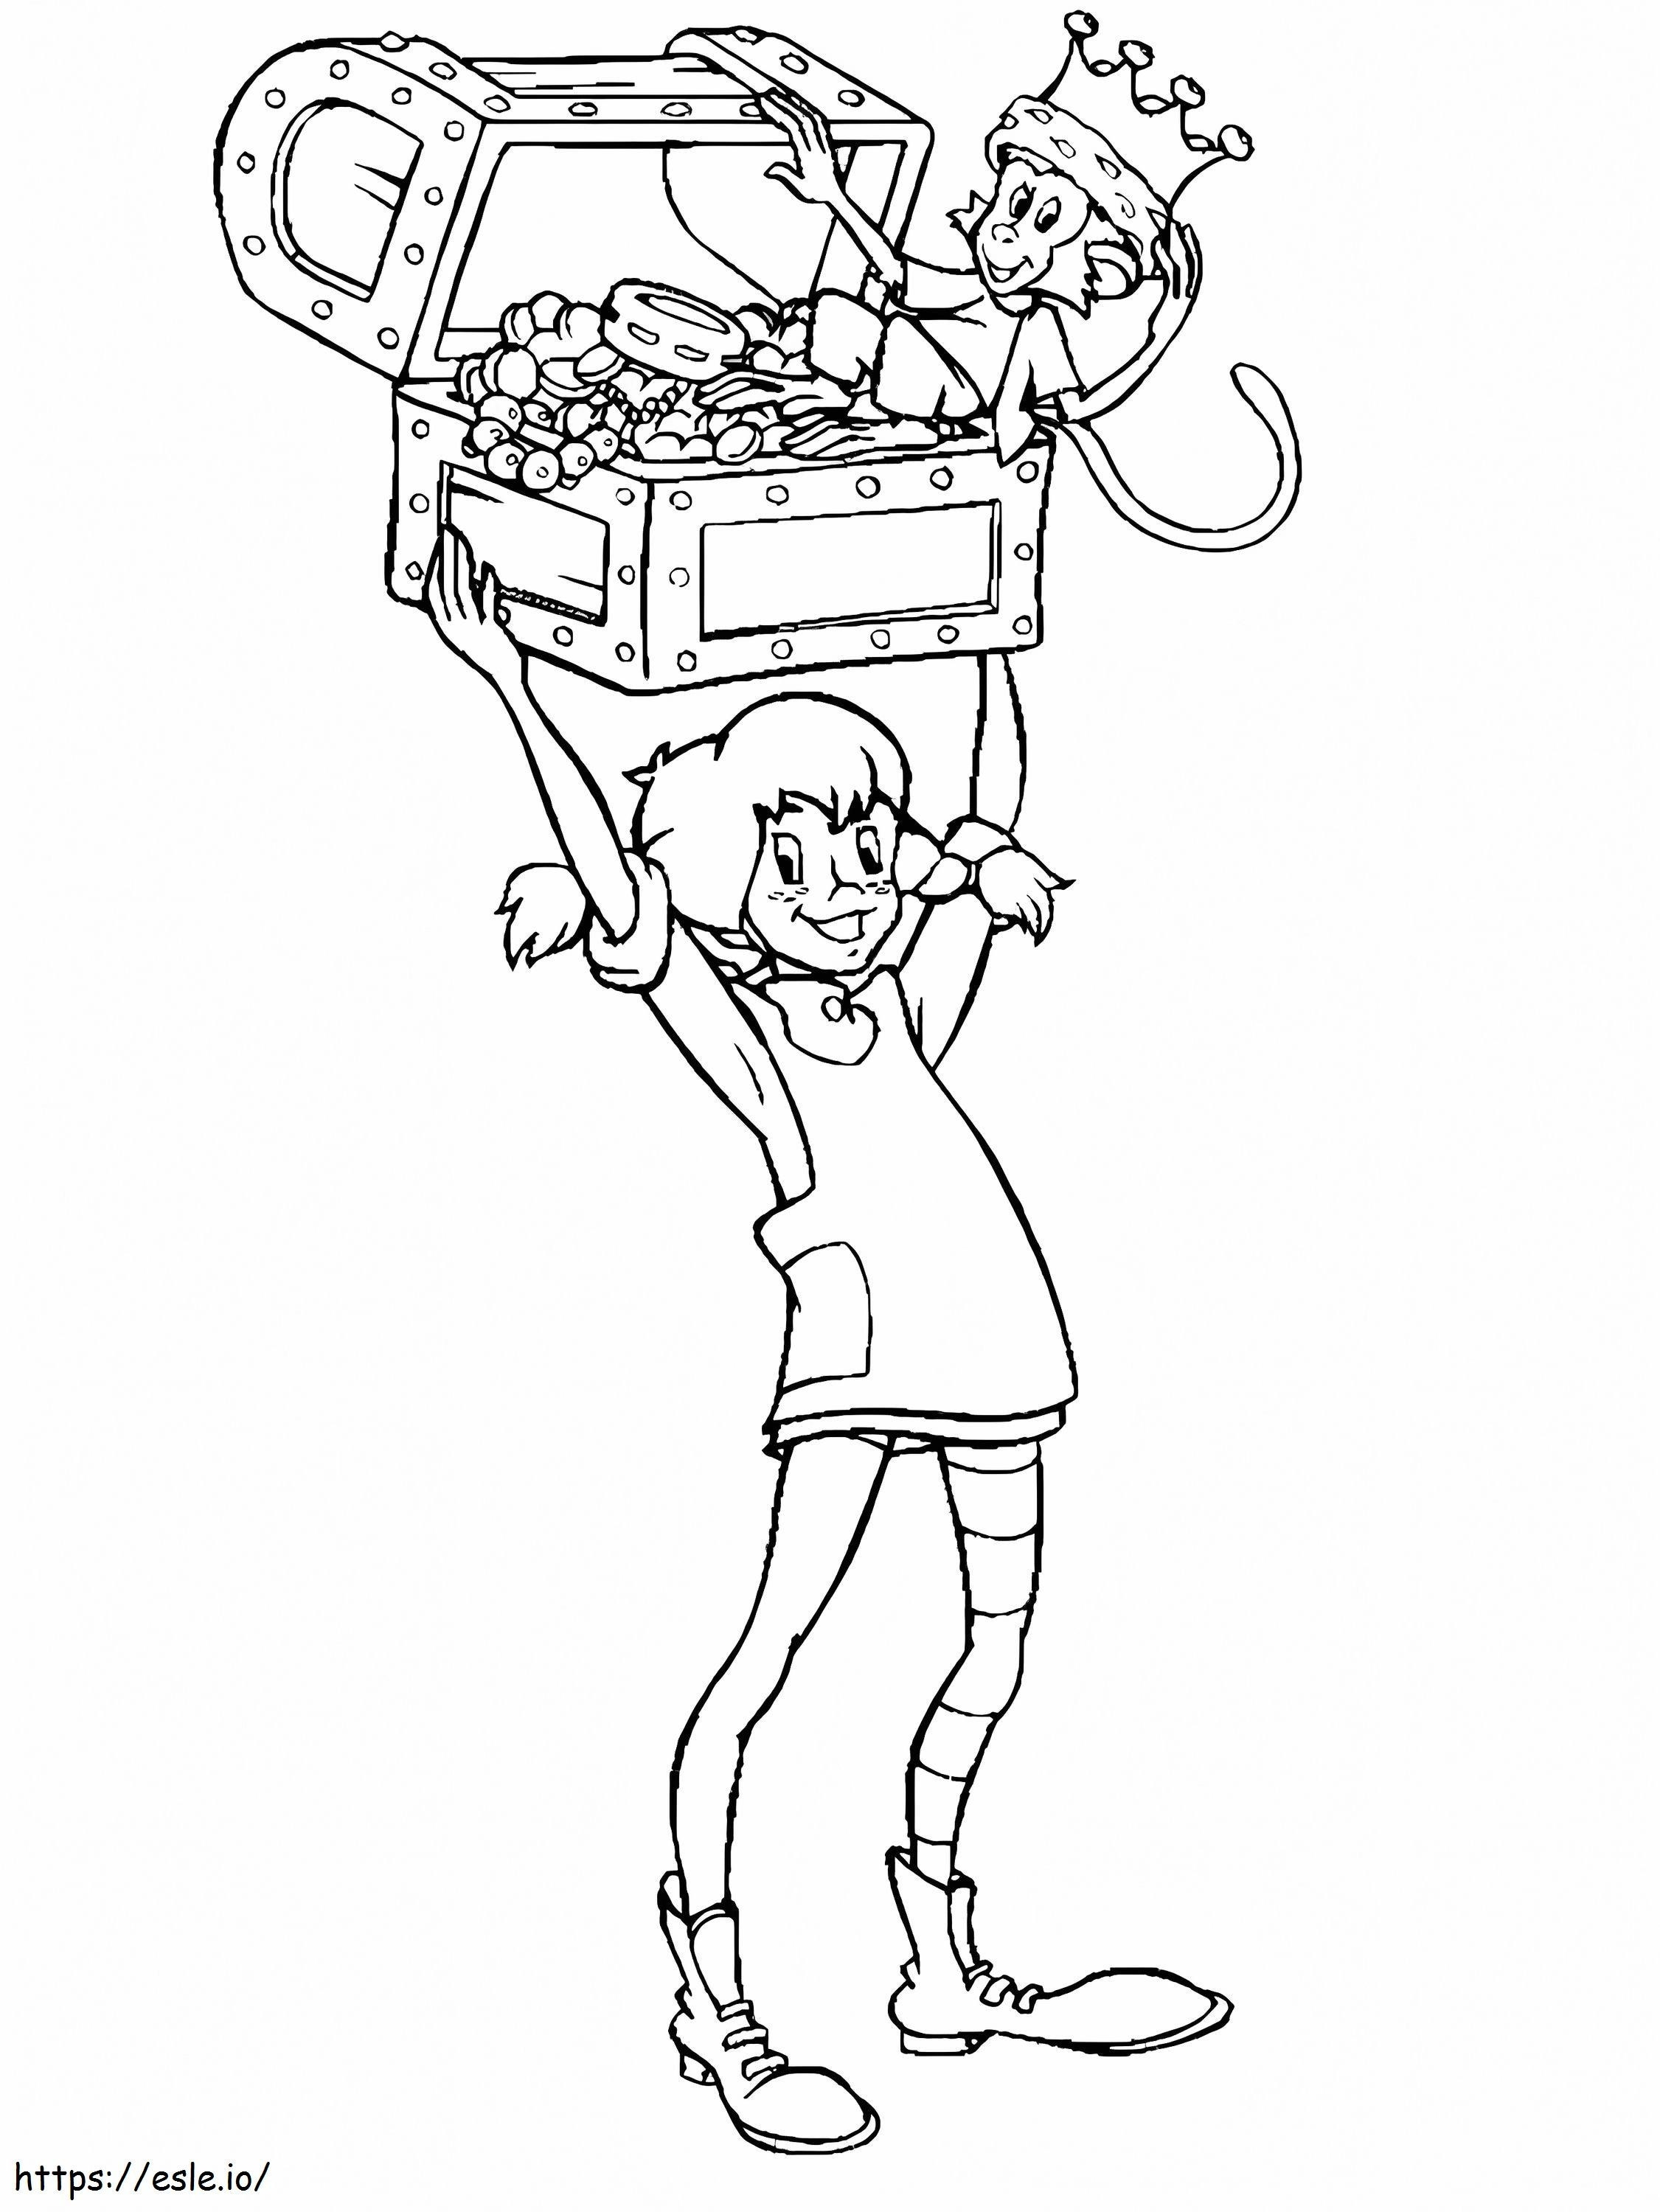 Pippi Longstocking With Treasure coloring page